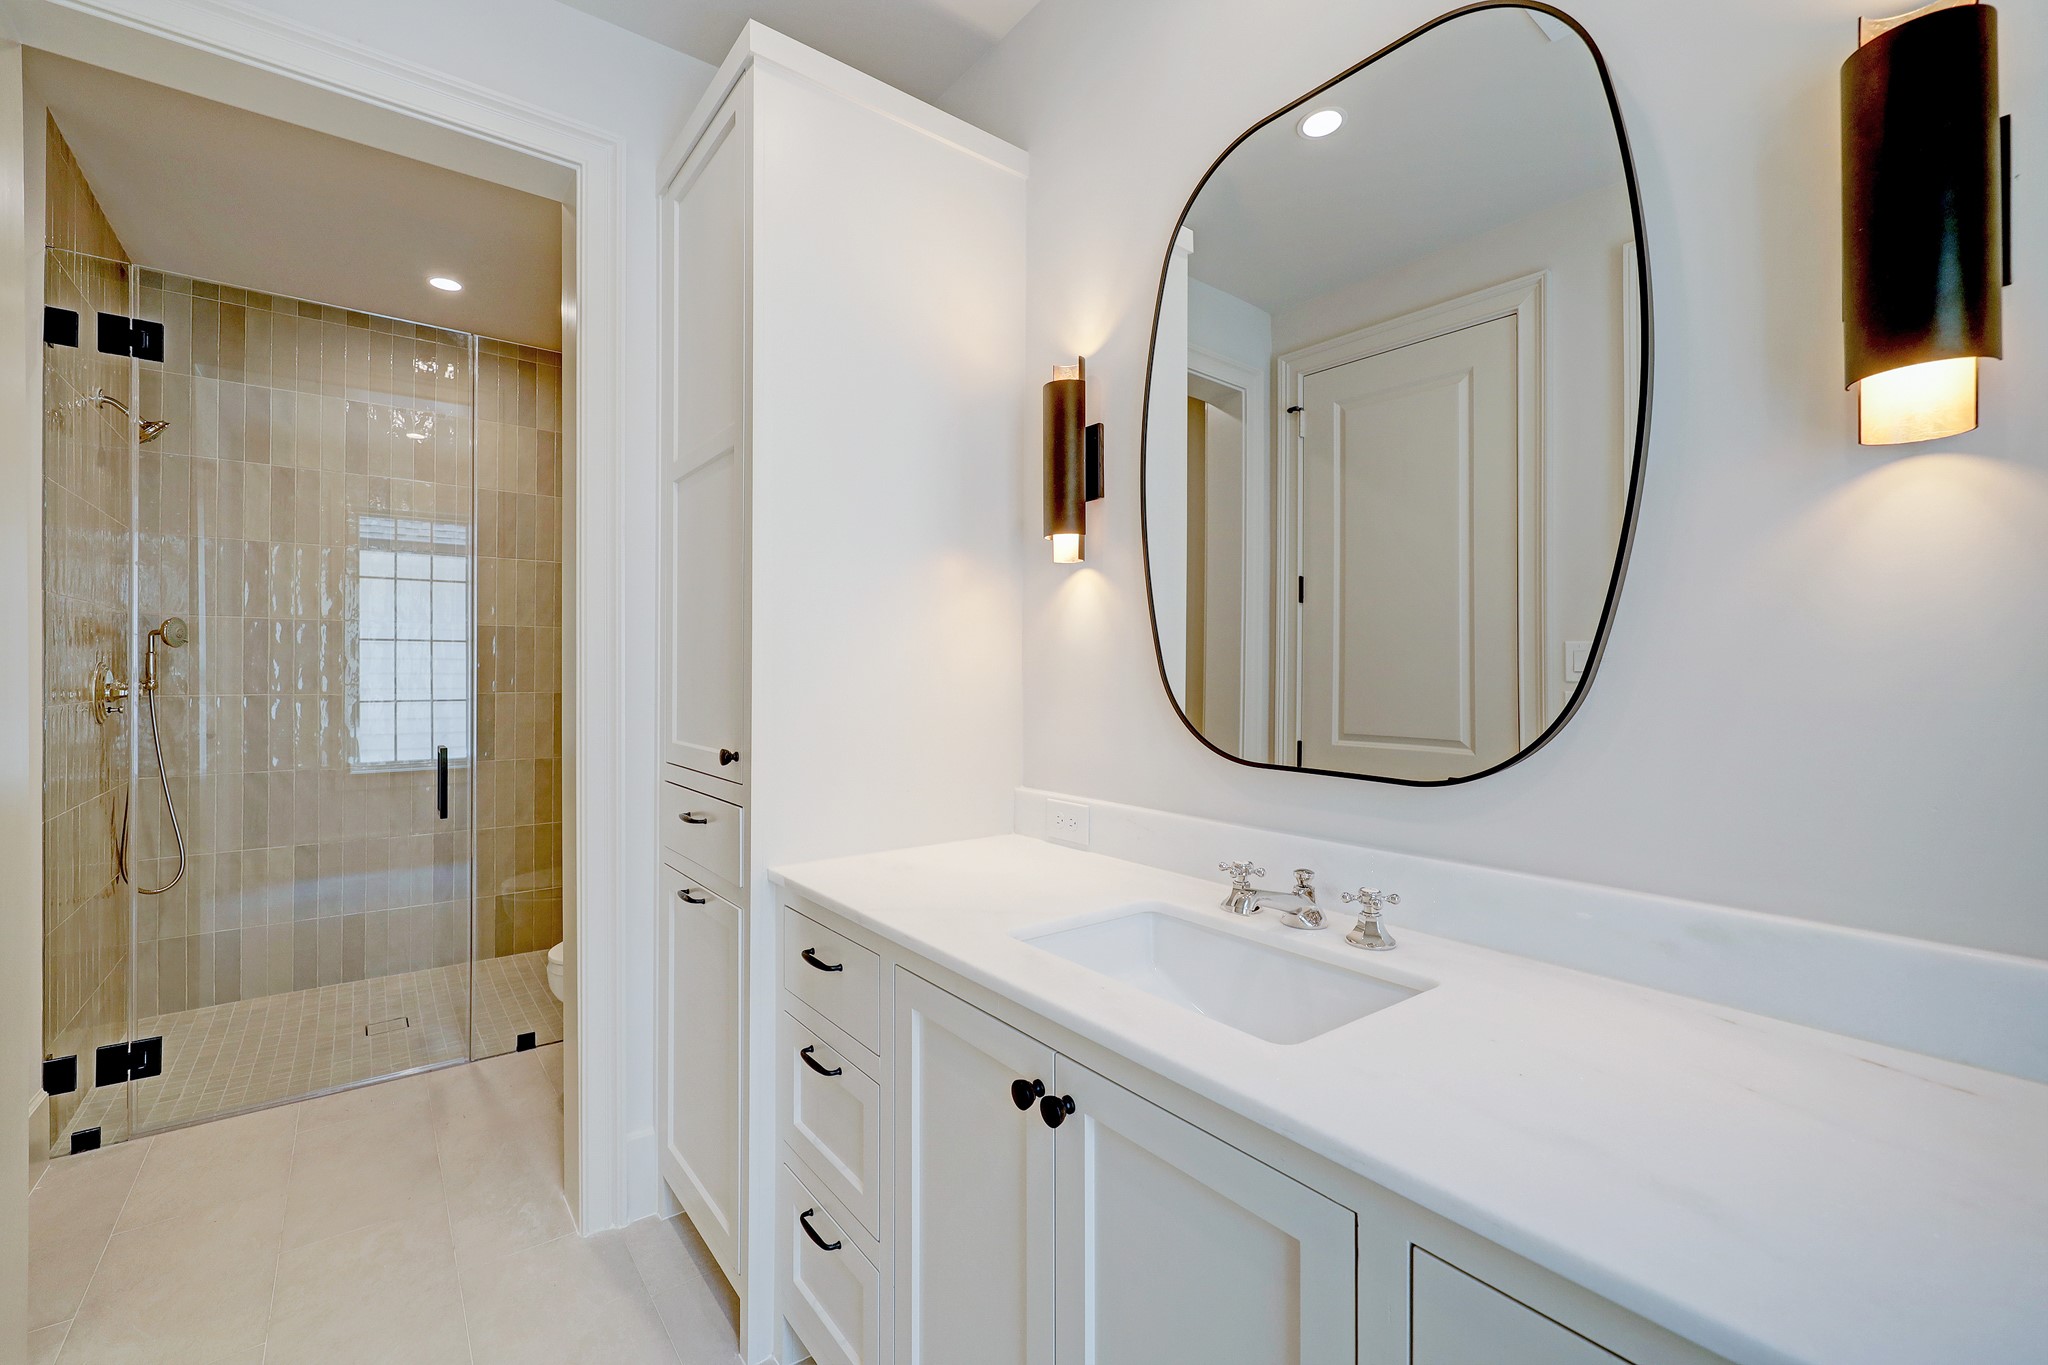 En suite bathroom with designer lighting, Noble white marble countertops and black cabinetry hardware.